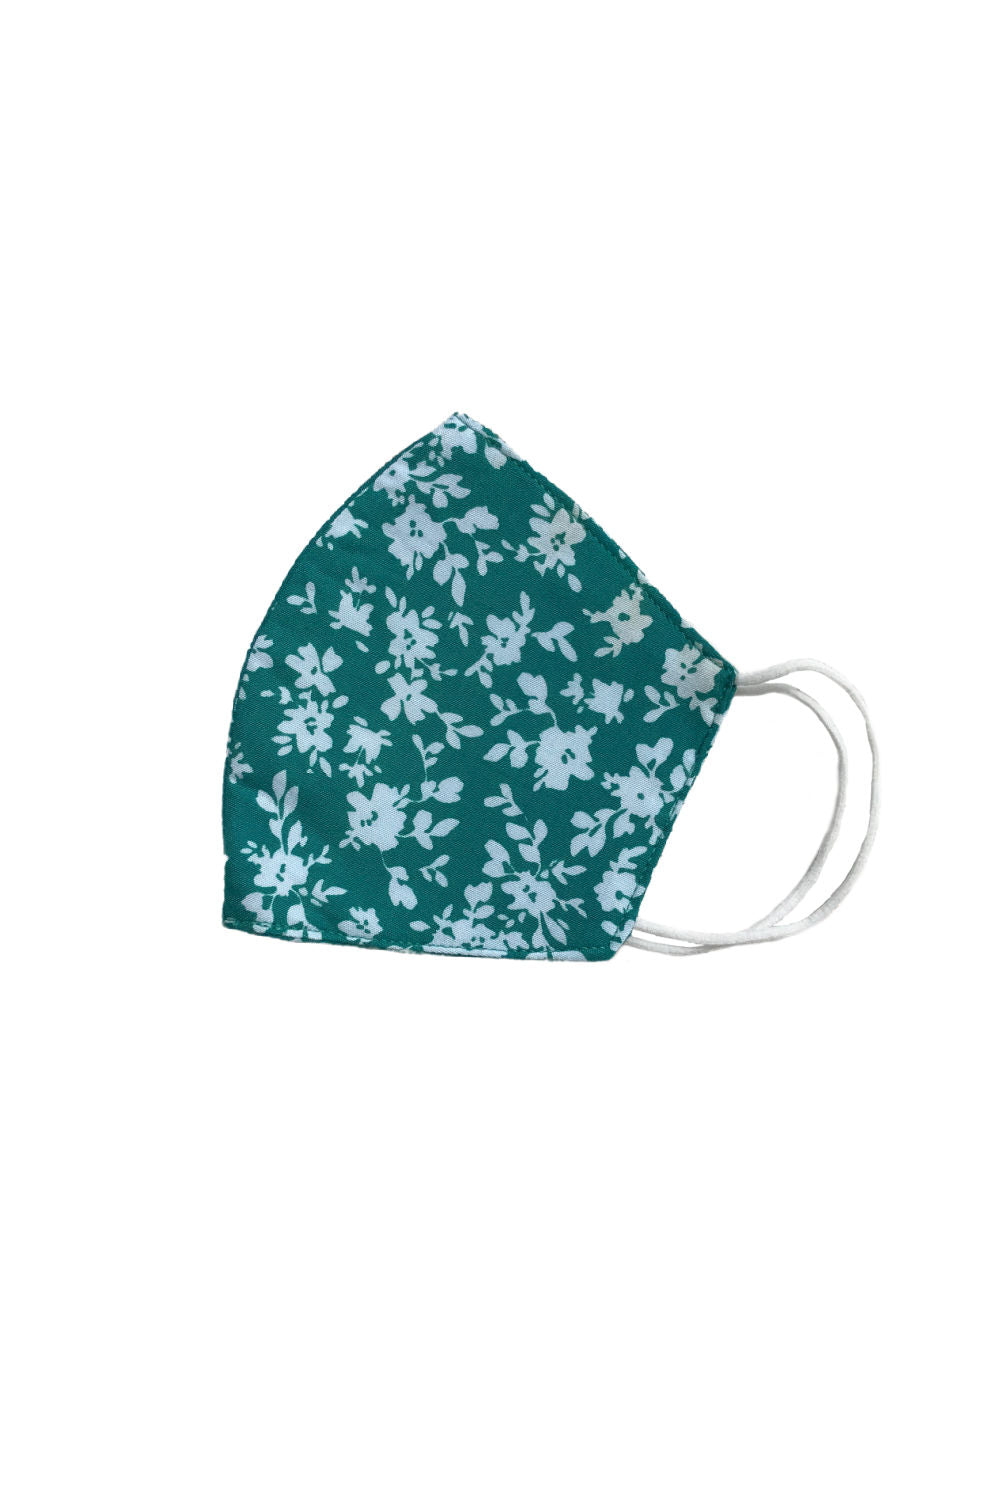 cloth-face-mask-green-white-floral